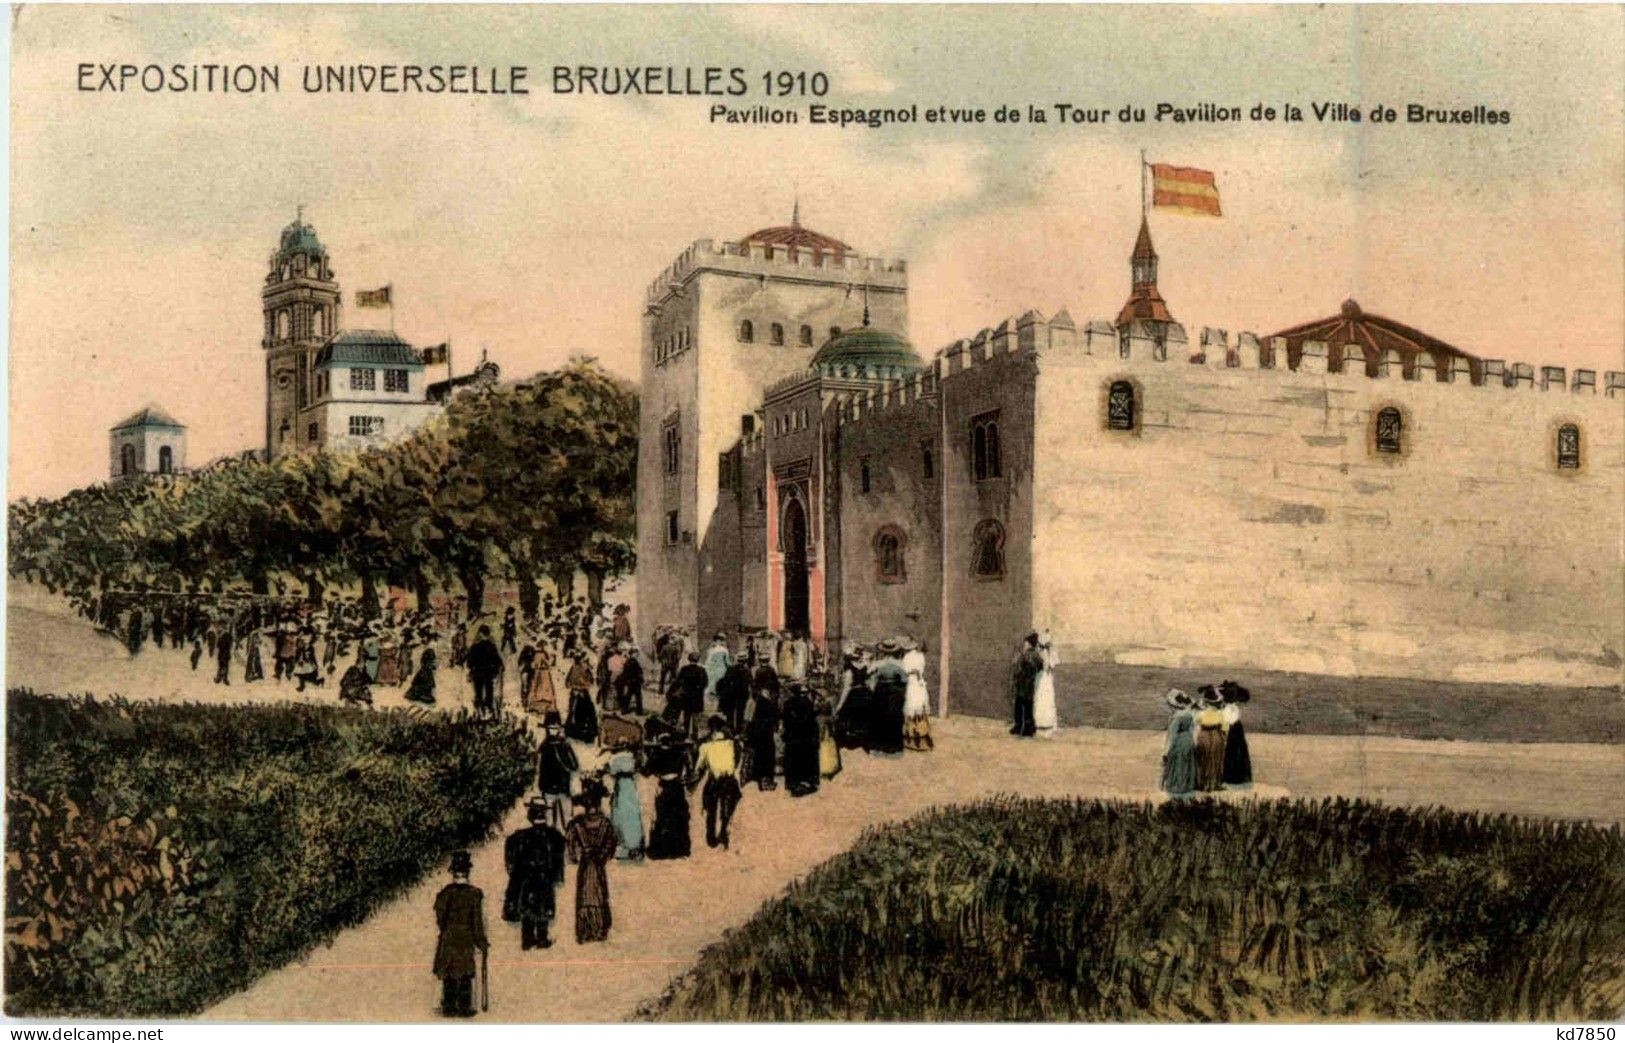 Bruxelles - Exposition Universelle 1910 - Expositions Universelles